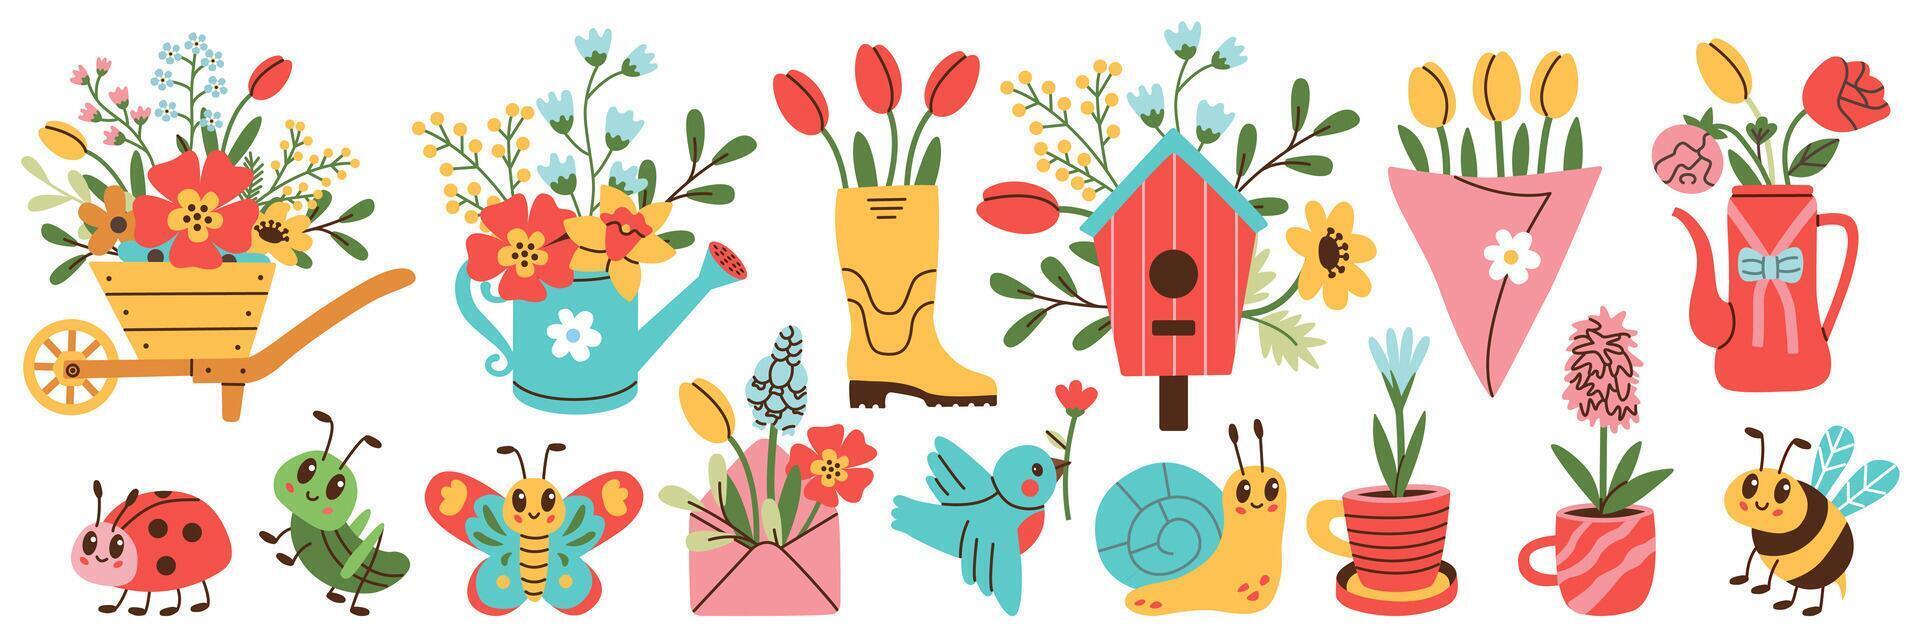 Set of spring hand drawn elements. Floral decor. Flowers, branches, bouquets, watering can, teapot, birdhouse, insects. vector